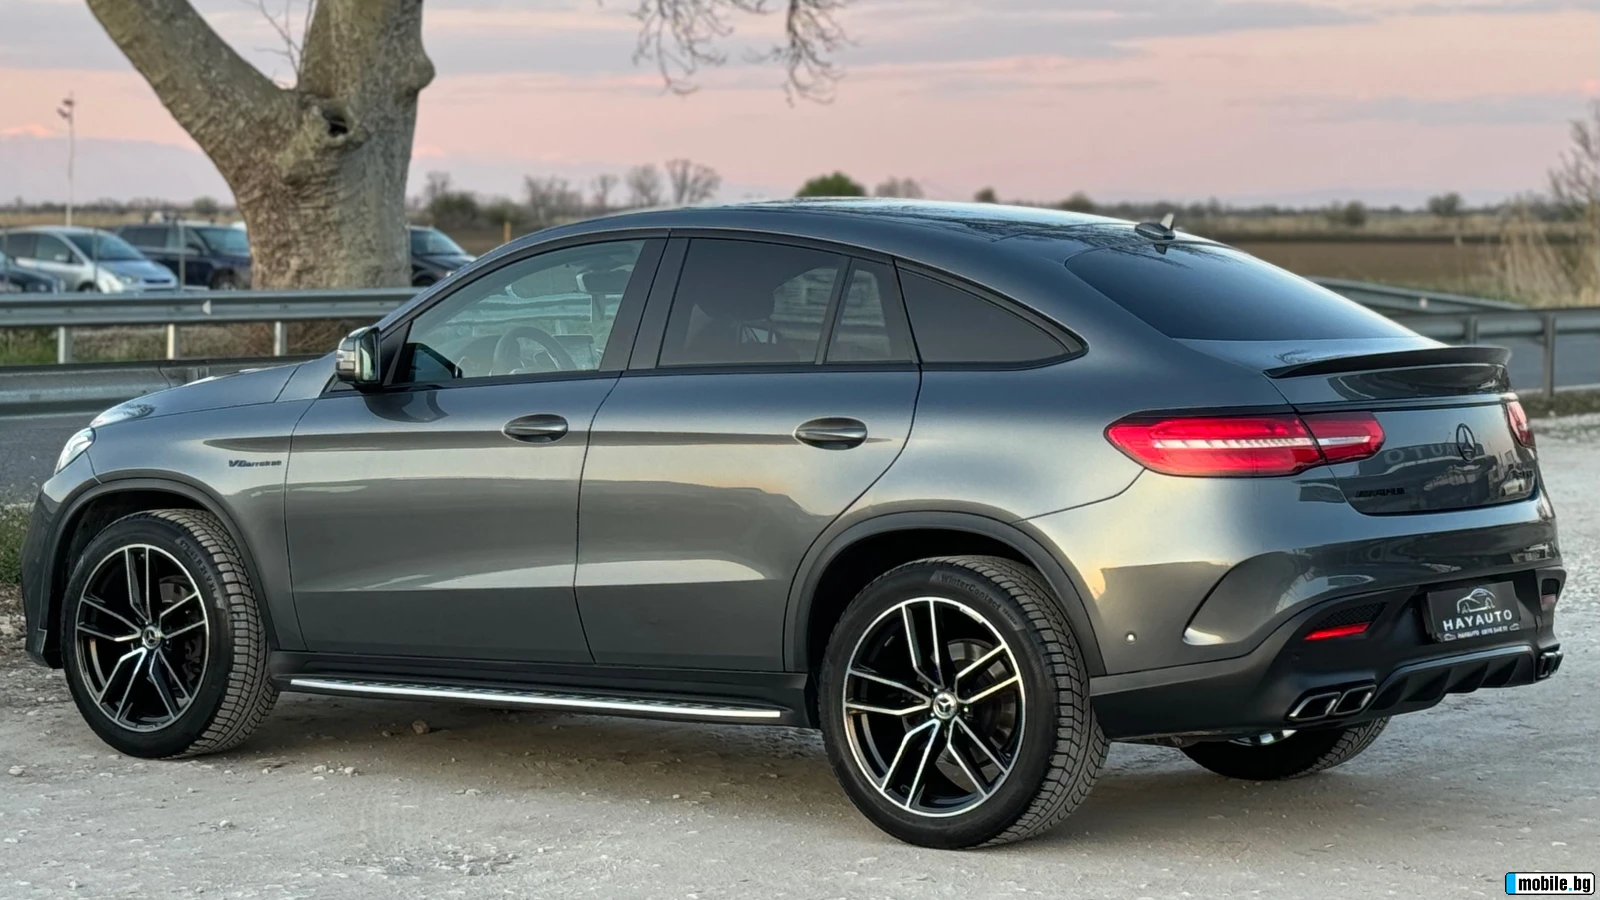 Mercedes-Benz GLE Coupe 350d=4Matic=63 AMG=9G-tronic=360*= | Mobile.bg   7